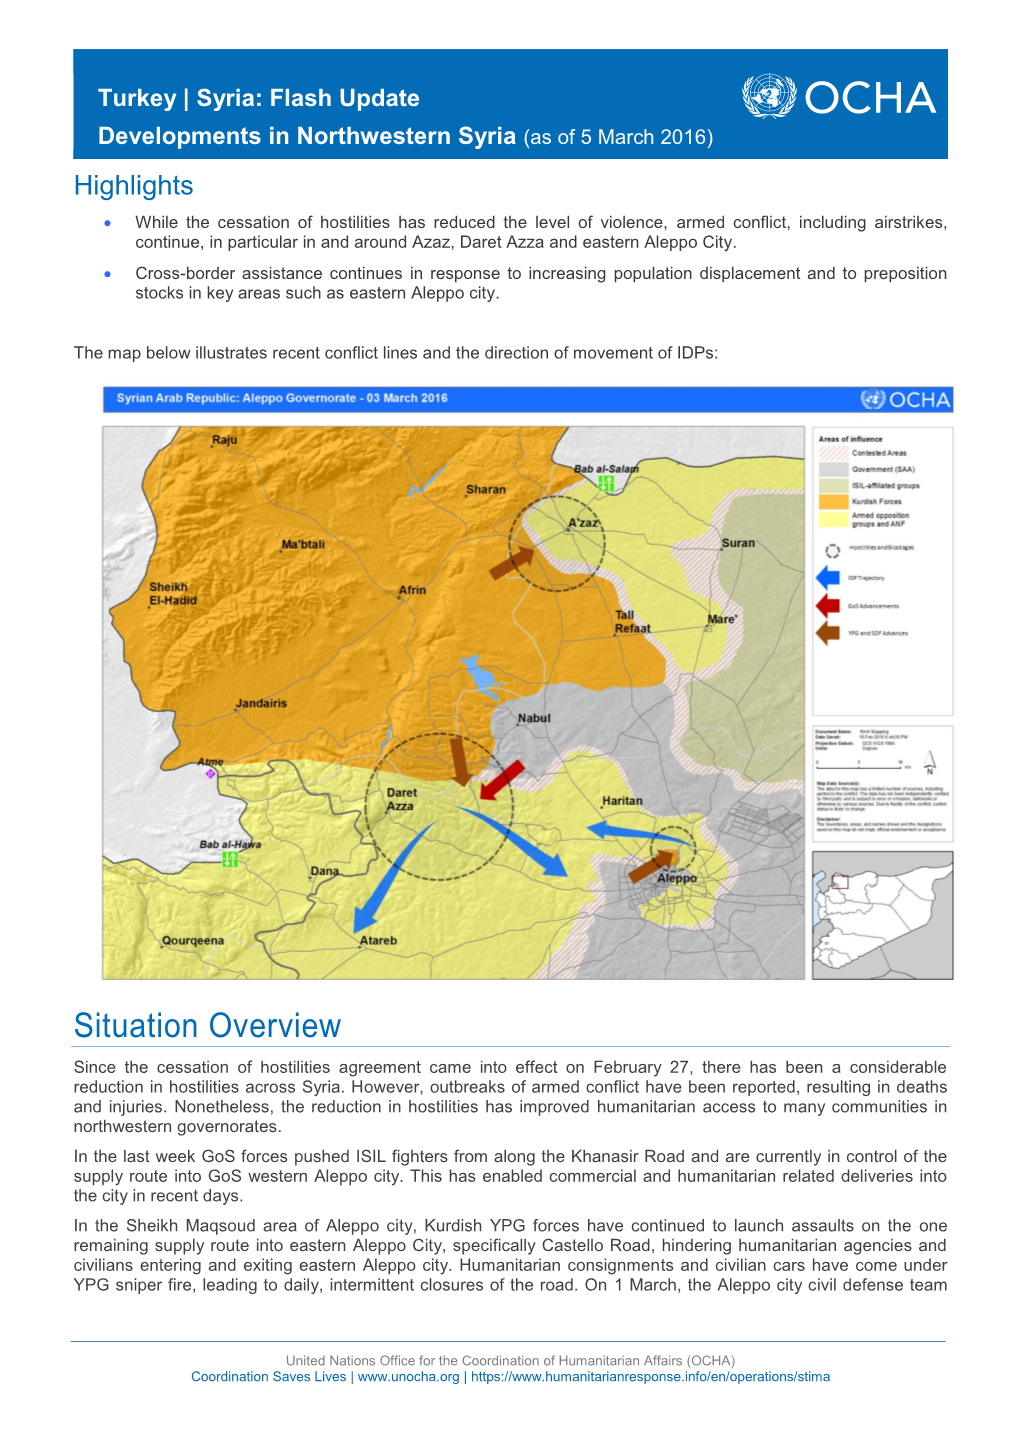 Situation Overview Since the Cessation of Hostilities Agreement Came Into Effect on February 27, There Has Been a Considerable Reduction in Hostilities Across Syria